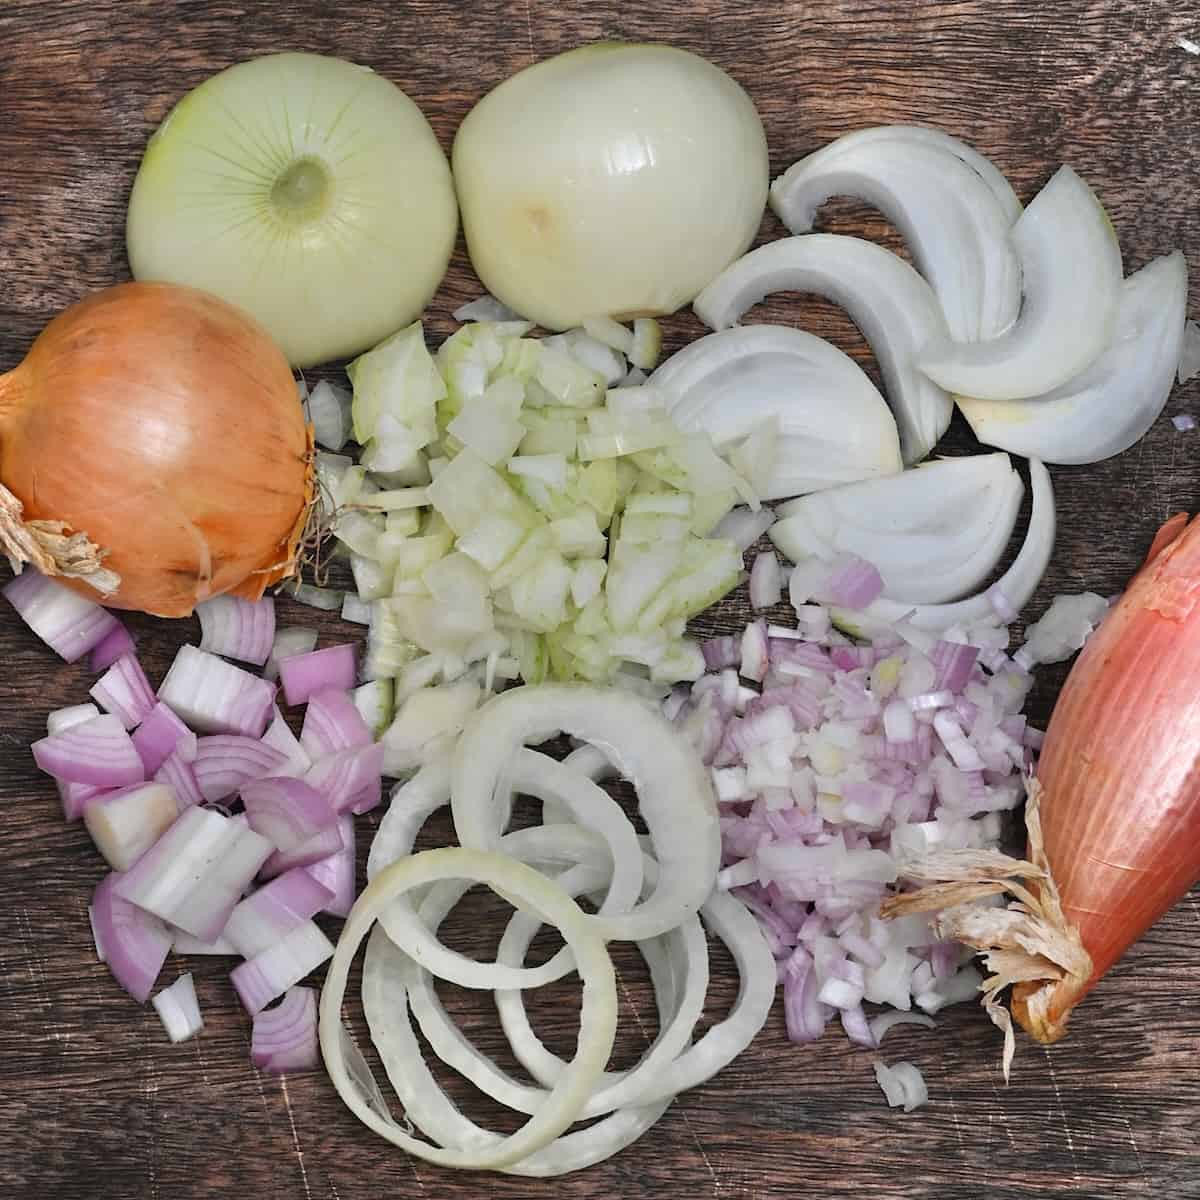 How to Cut an Onion: Dice, Mince, Chop, or Slice